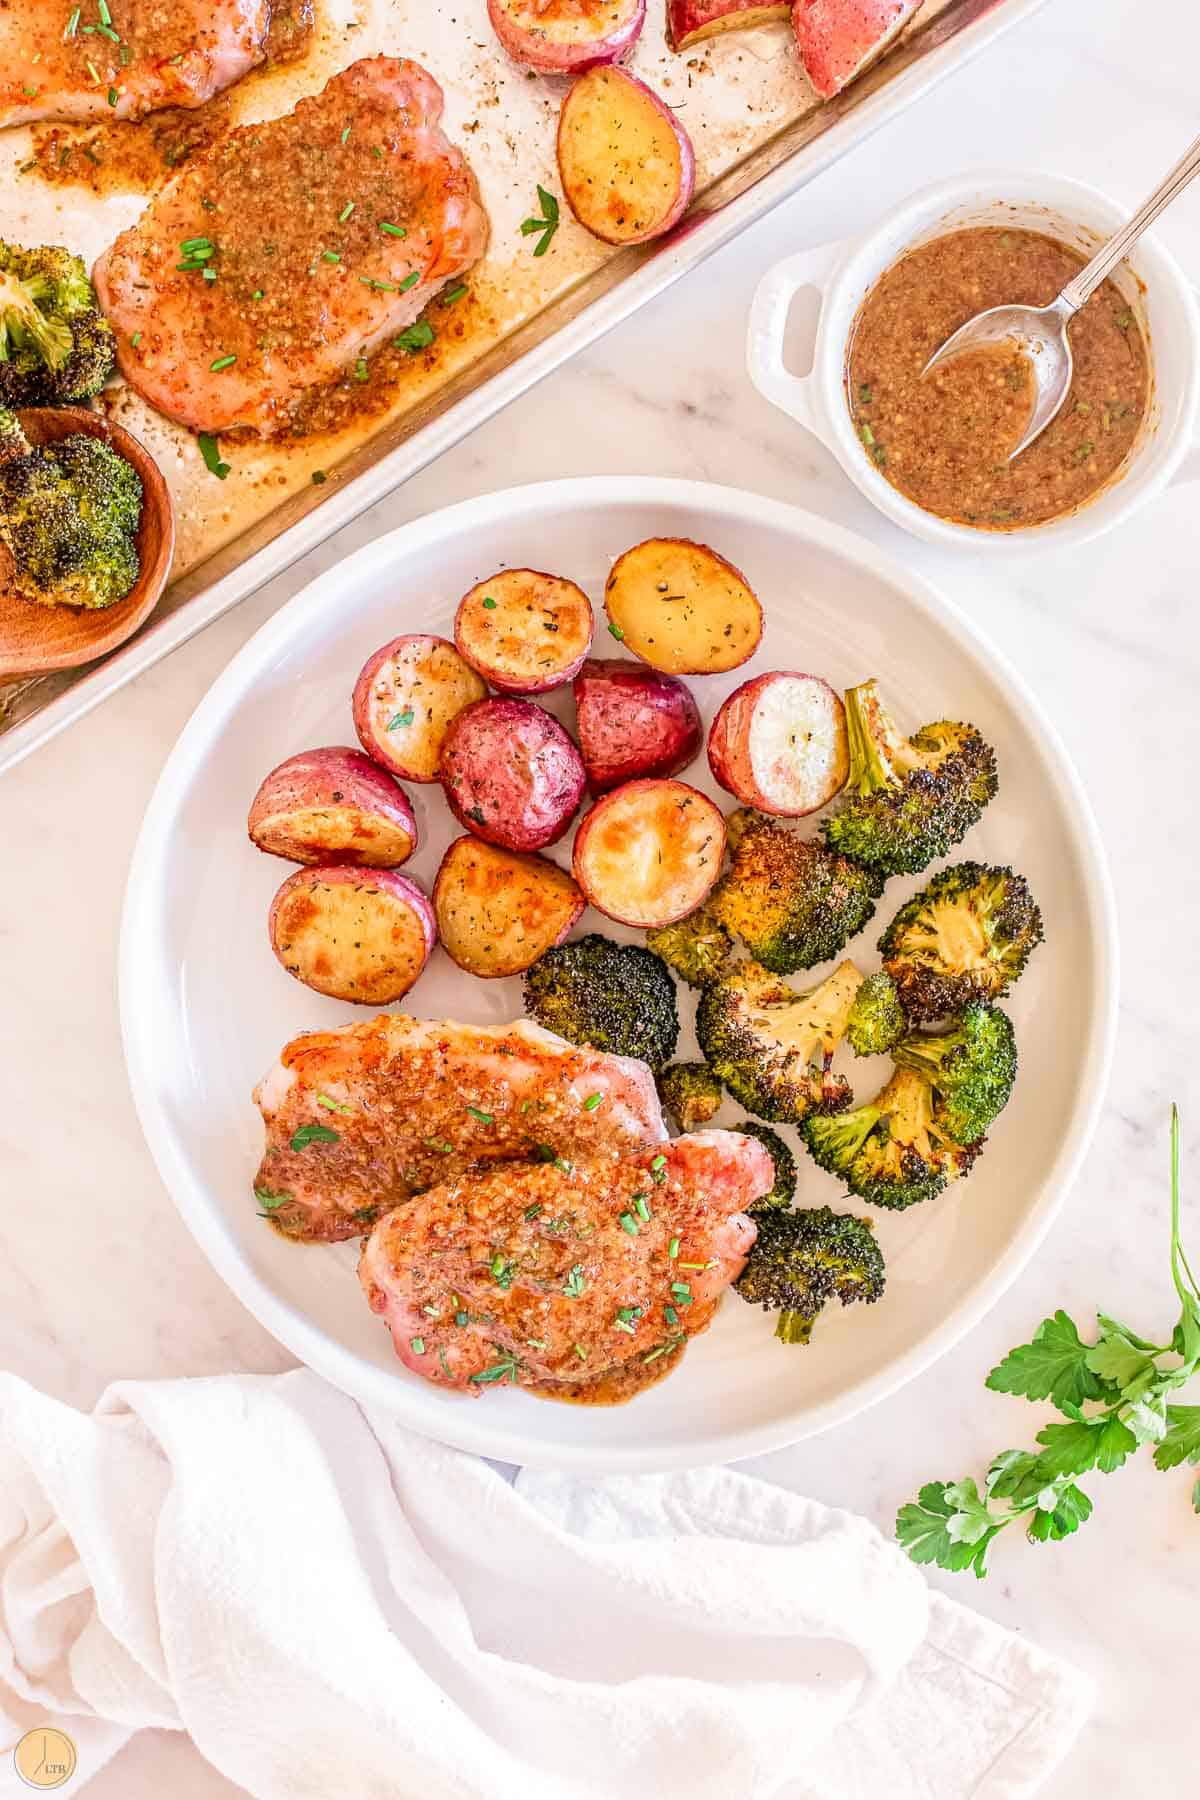 honey mustard pork chops and broccoli with potatoes make a great sheet pan meal